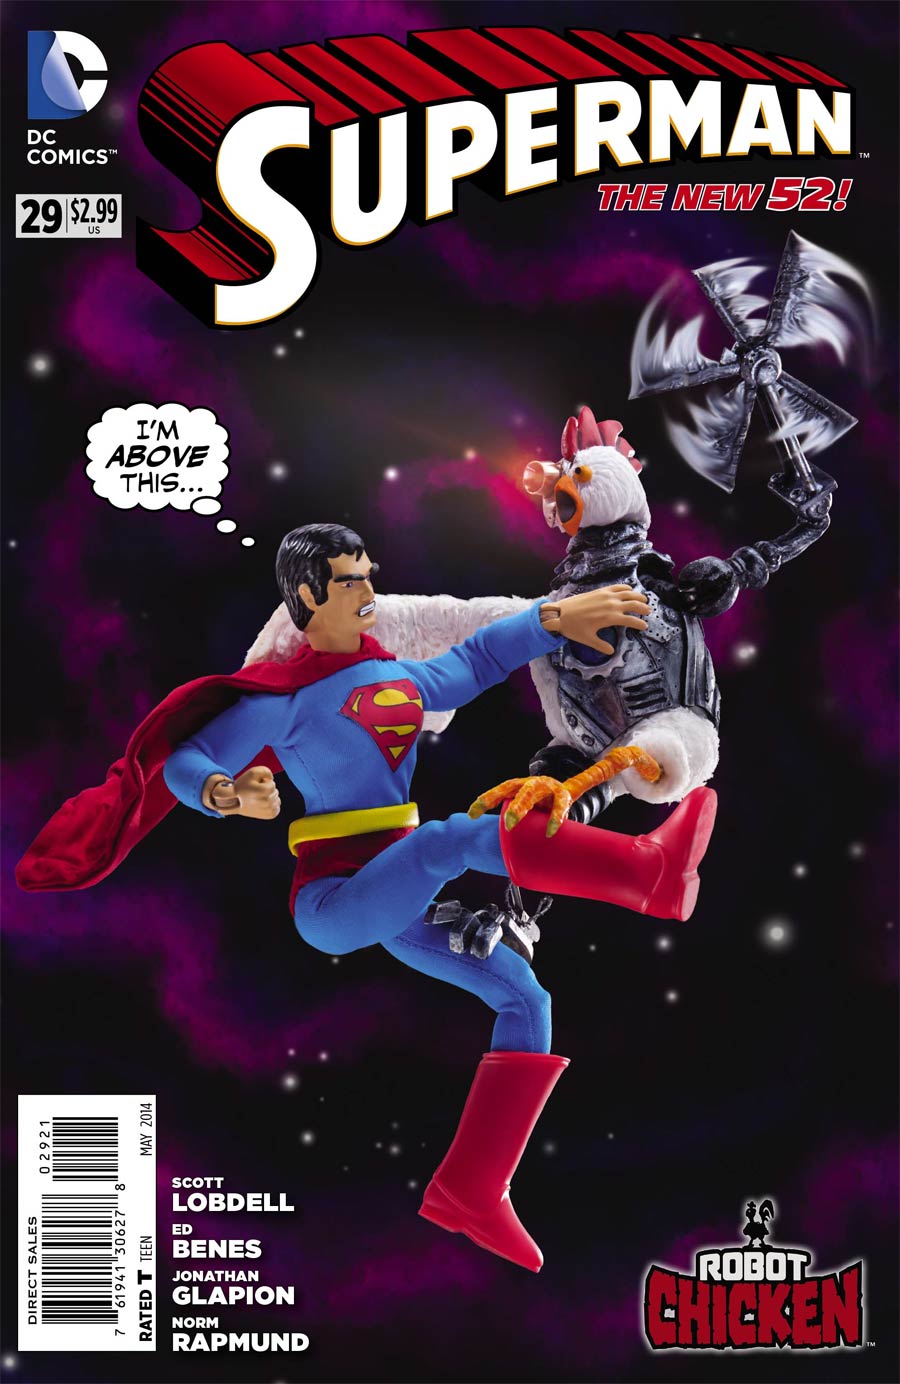 Superman Vol 4 #29 Cover B Incentive Robot Chicken Variant Cover